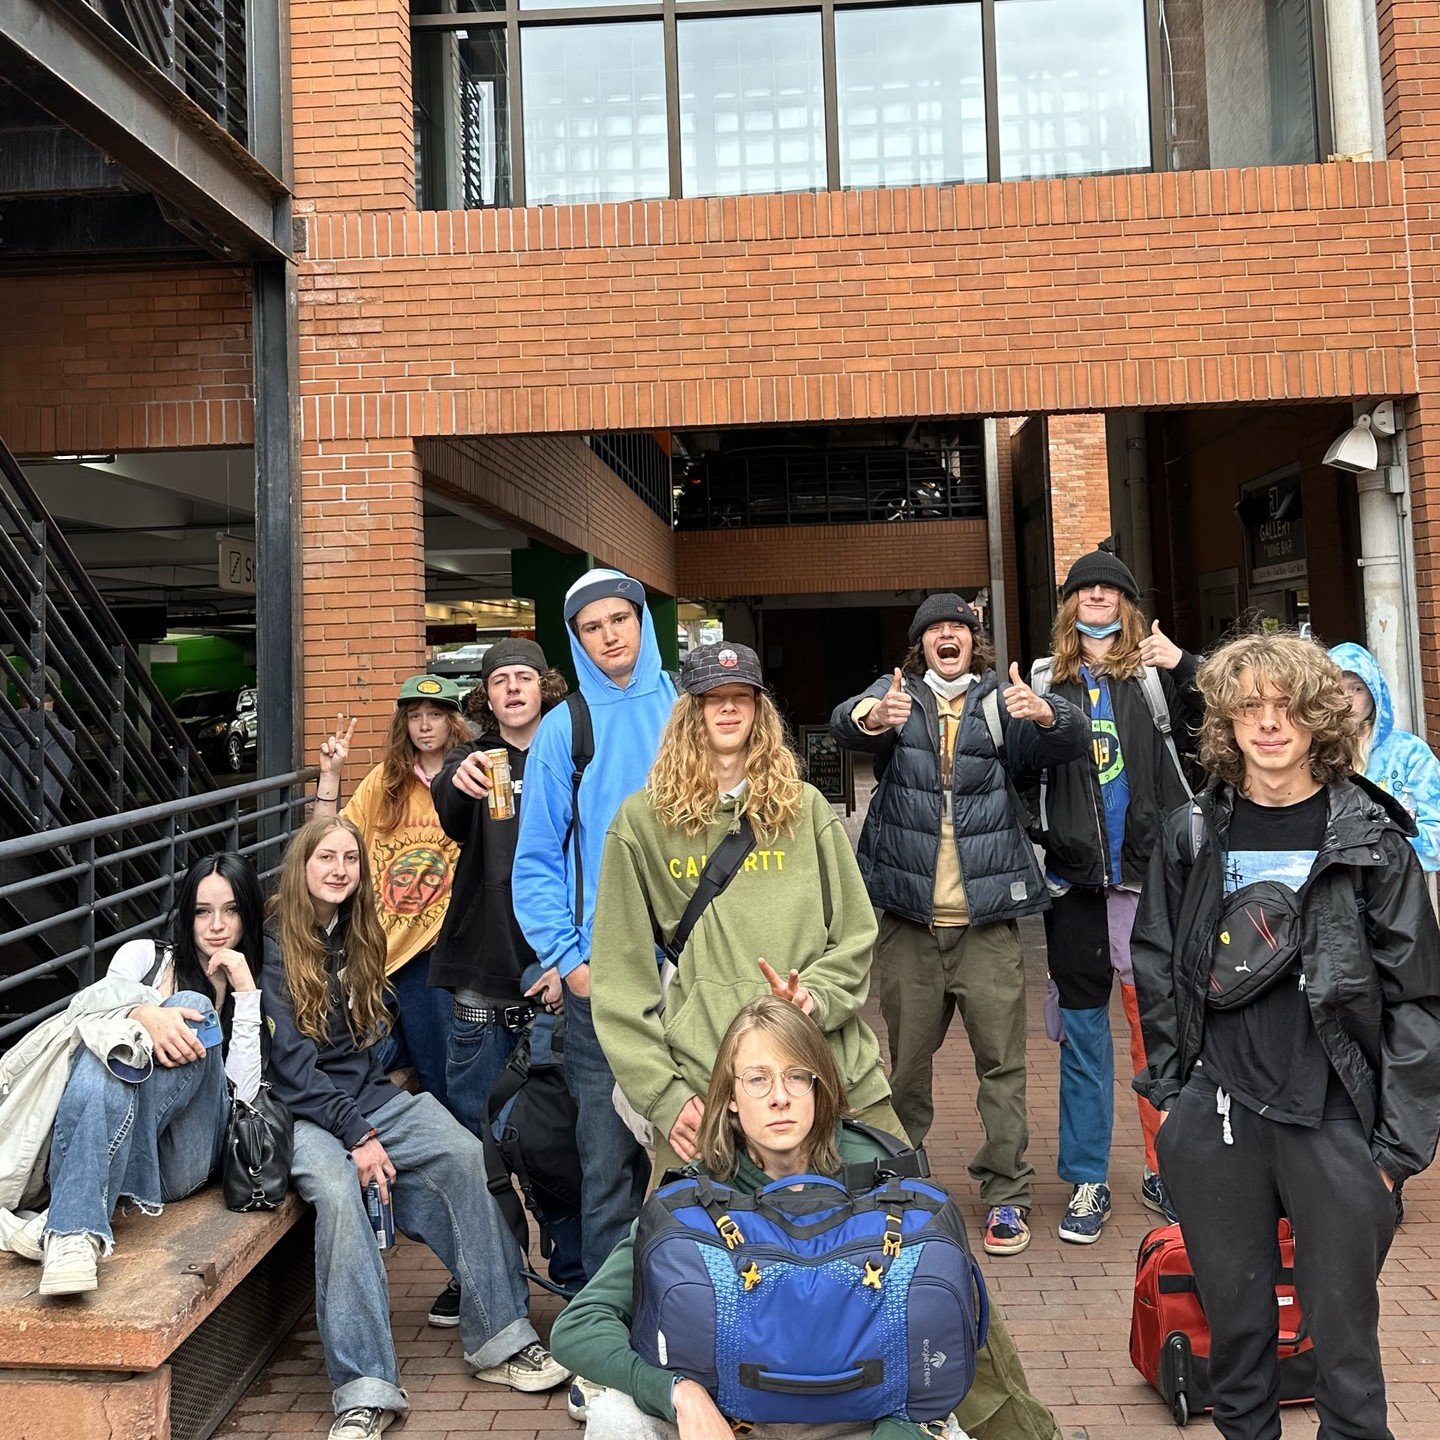 We are so very proud of our Chinook West students, whose service project provided care packages to the unhoused in Boulder. Kudos to these philanthropic youth and everyone in our community who dropped off food and other essentials! 

The Teen Center 